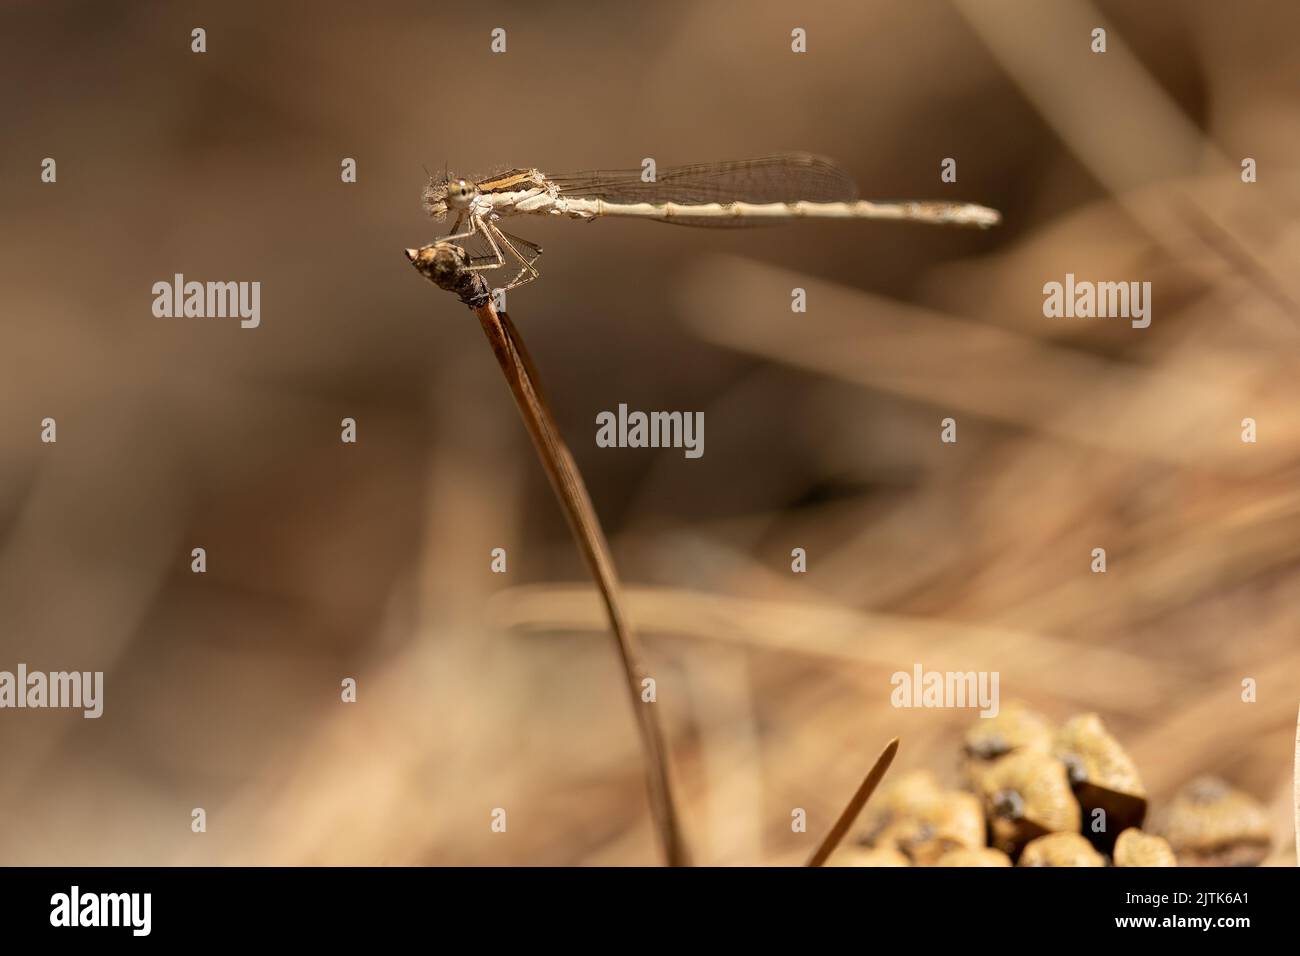 Winter damselfly perched on stalk in understory of pine forest, France. Stock Photo